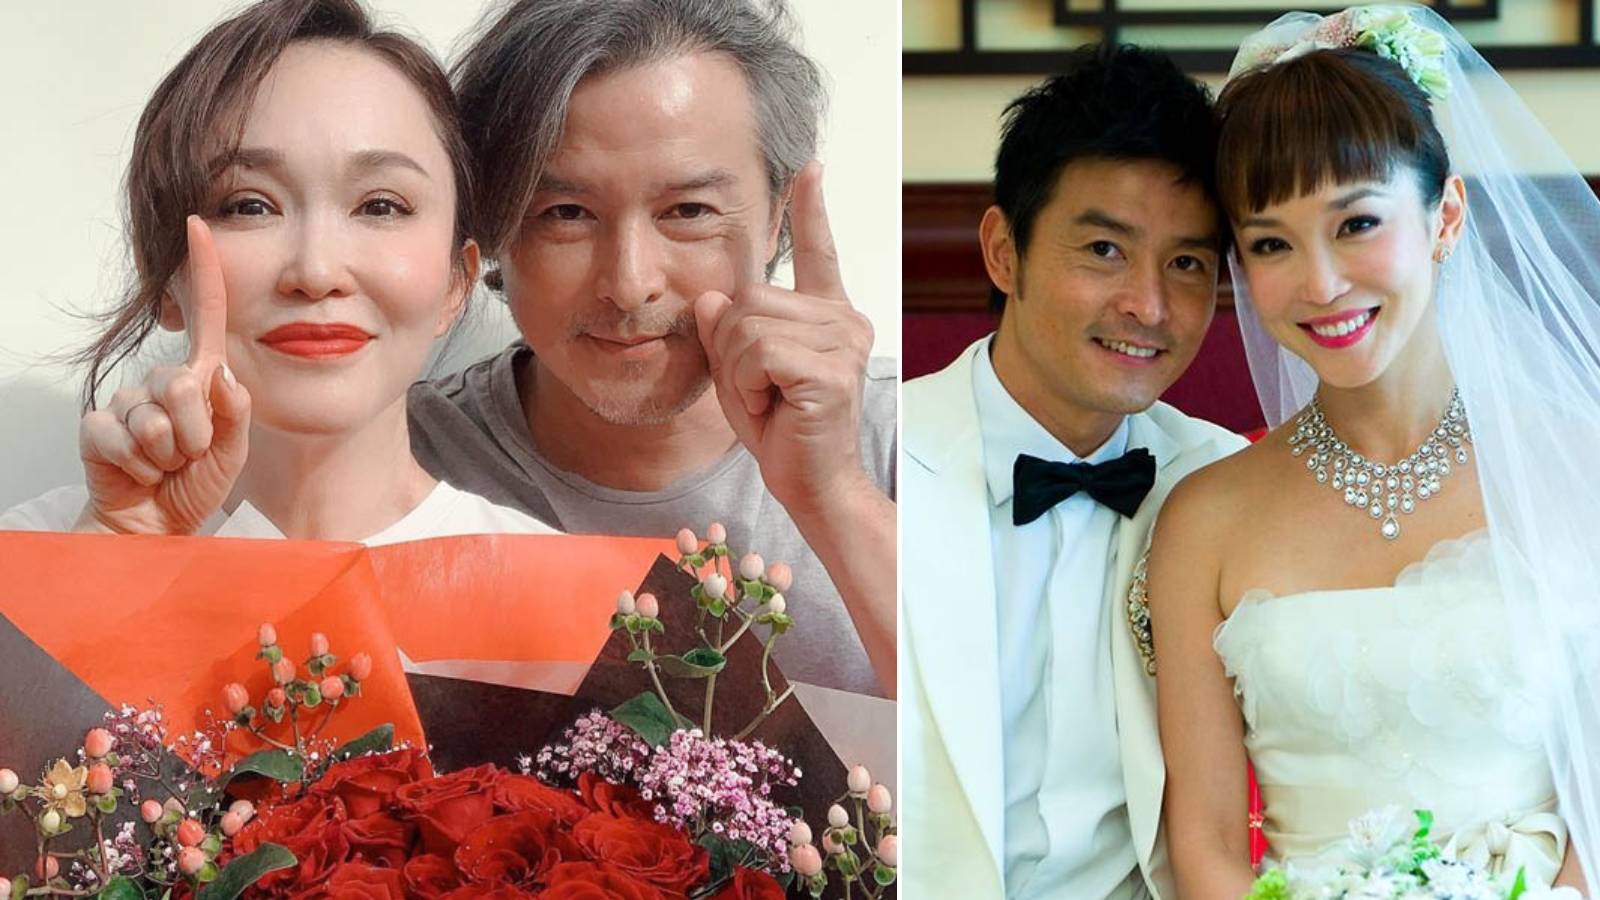 Christopher Lee And Fann Wong Celebrate 11th Wedding Anniversary, He Says It’s “Like Their First All Over Again”